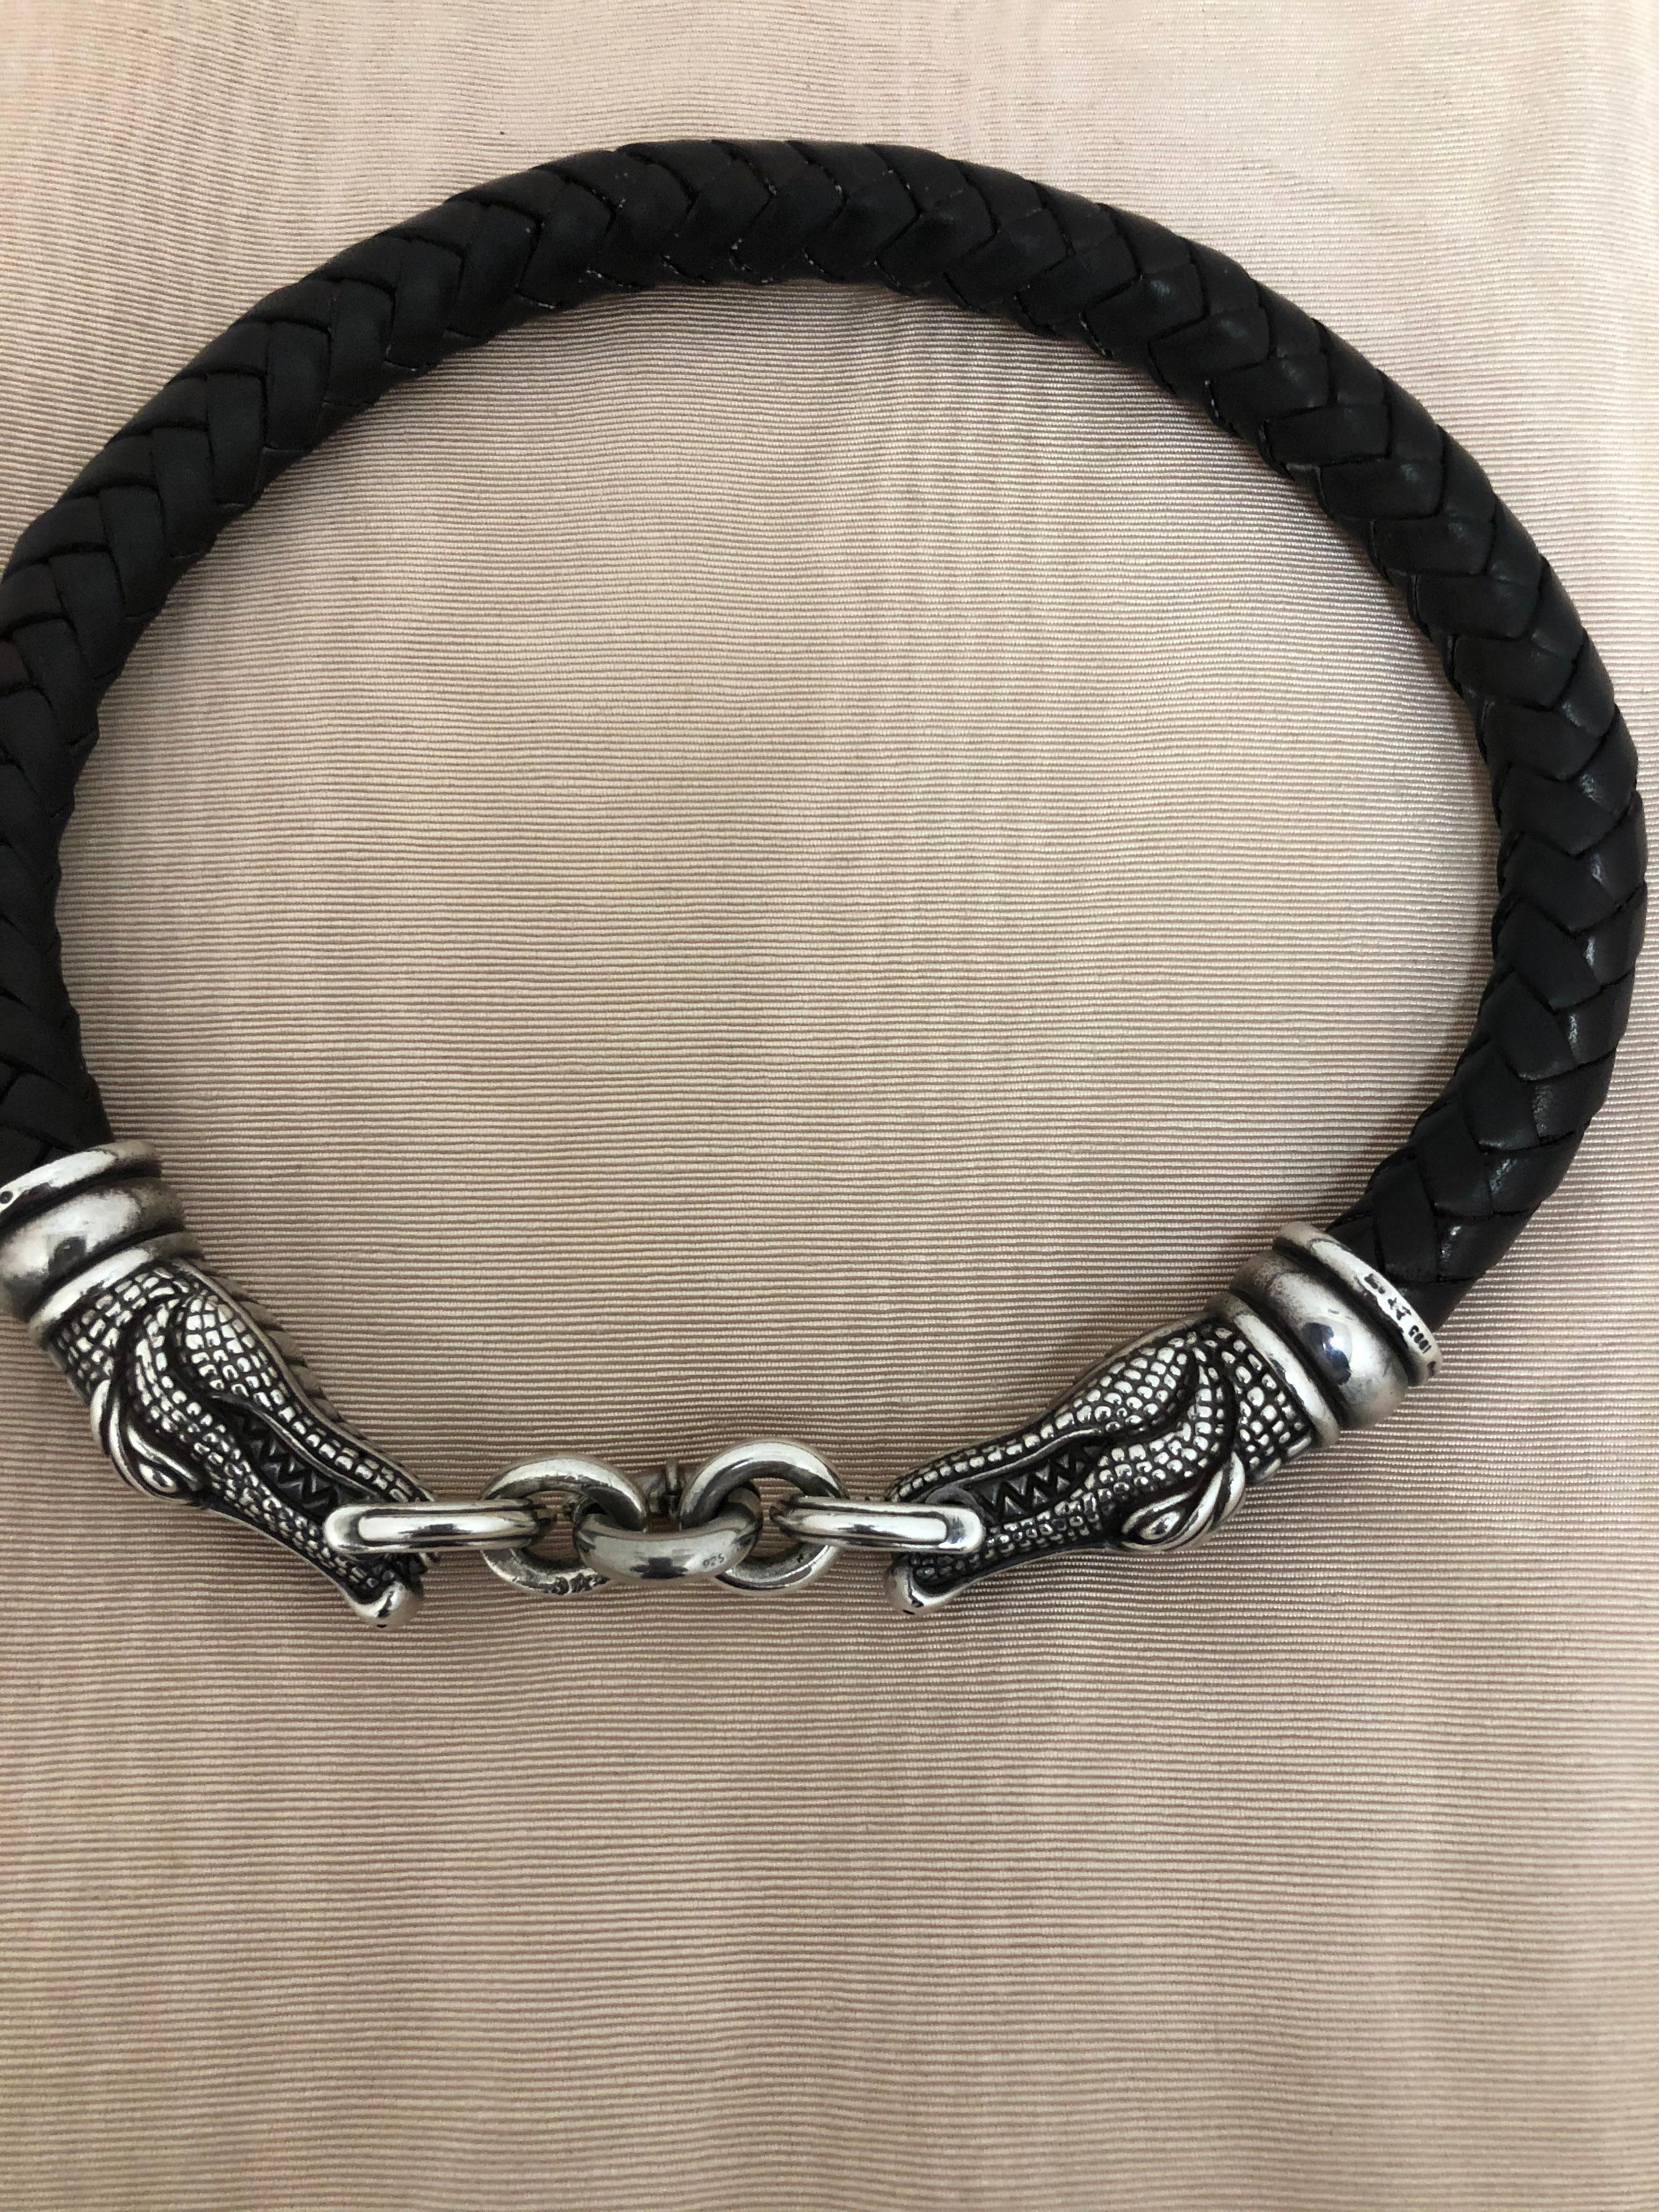 A work of art! This 1995 sterling silver and brown braided leather combo is in immaculate condition and comes with its pouch. The workmanship is superior and it is such a statement piece.

The silver alligator heads are stamped Kieselstein-Cord 1995